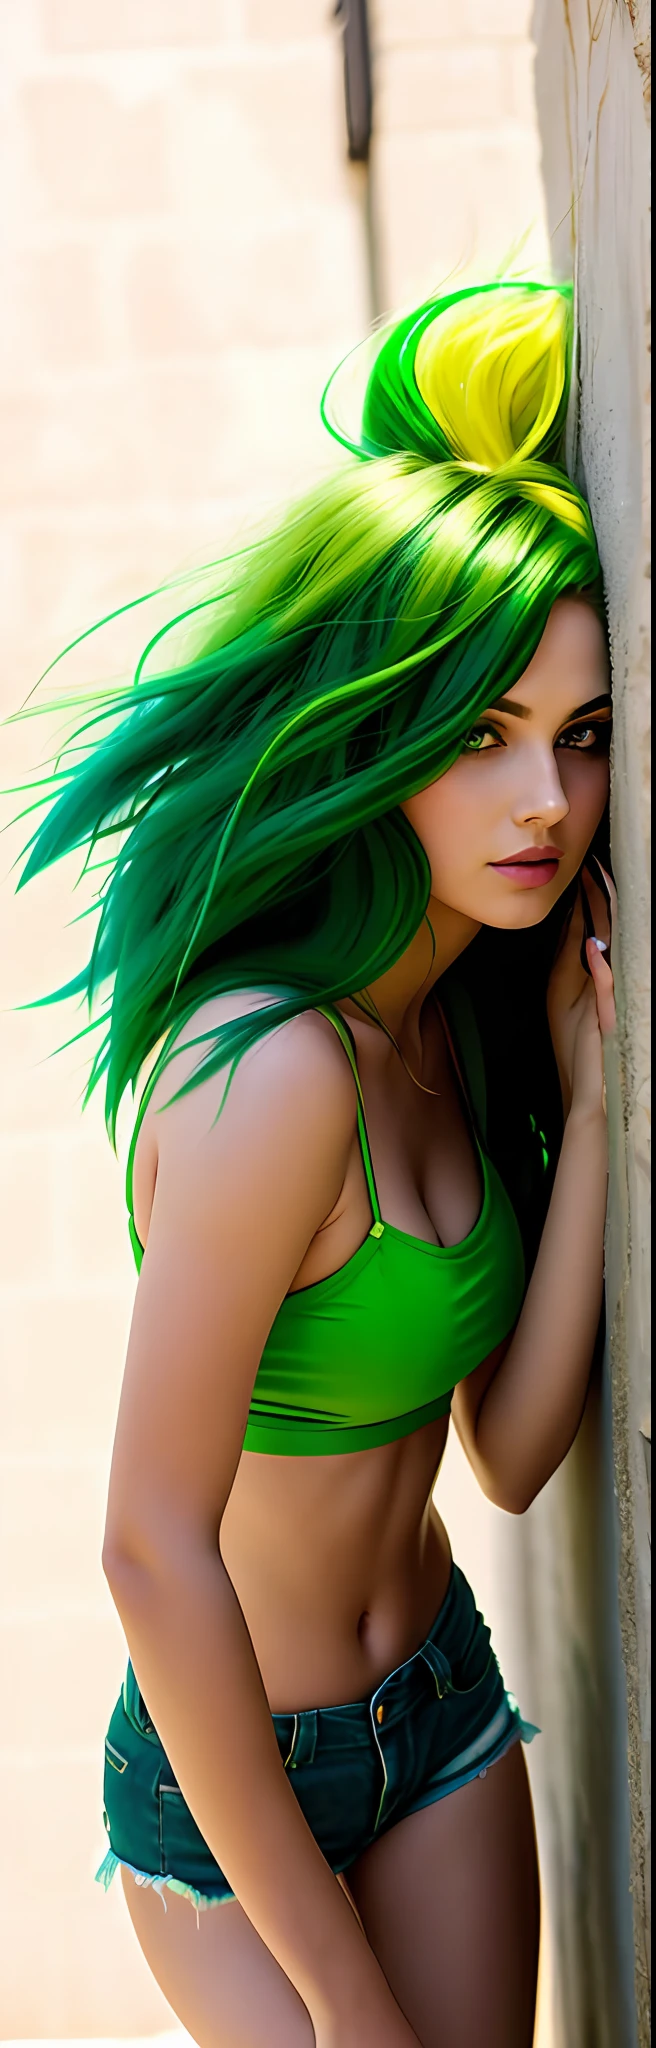 araffe woman with green hair leaning against a wall, sexy girl with green eyes, long green hair, green hair, beautiful clothes, green mane, tight outfit, vibrant green, green body, sexy green shorts, some green, leaning on the wall, bright green hair, long straight green black hair, green legs, green flowing hair, wearing  shorts